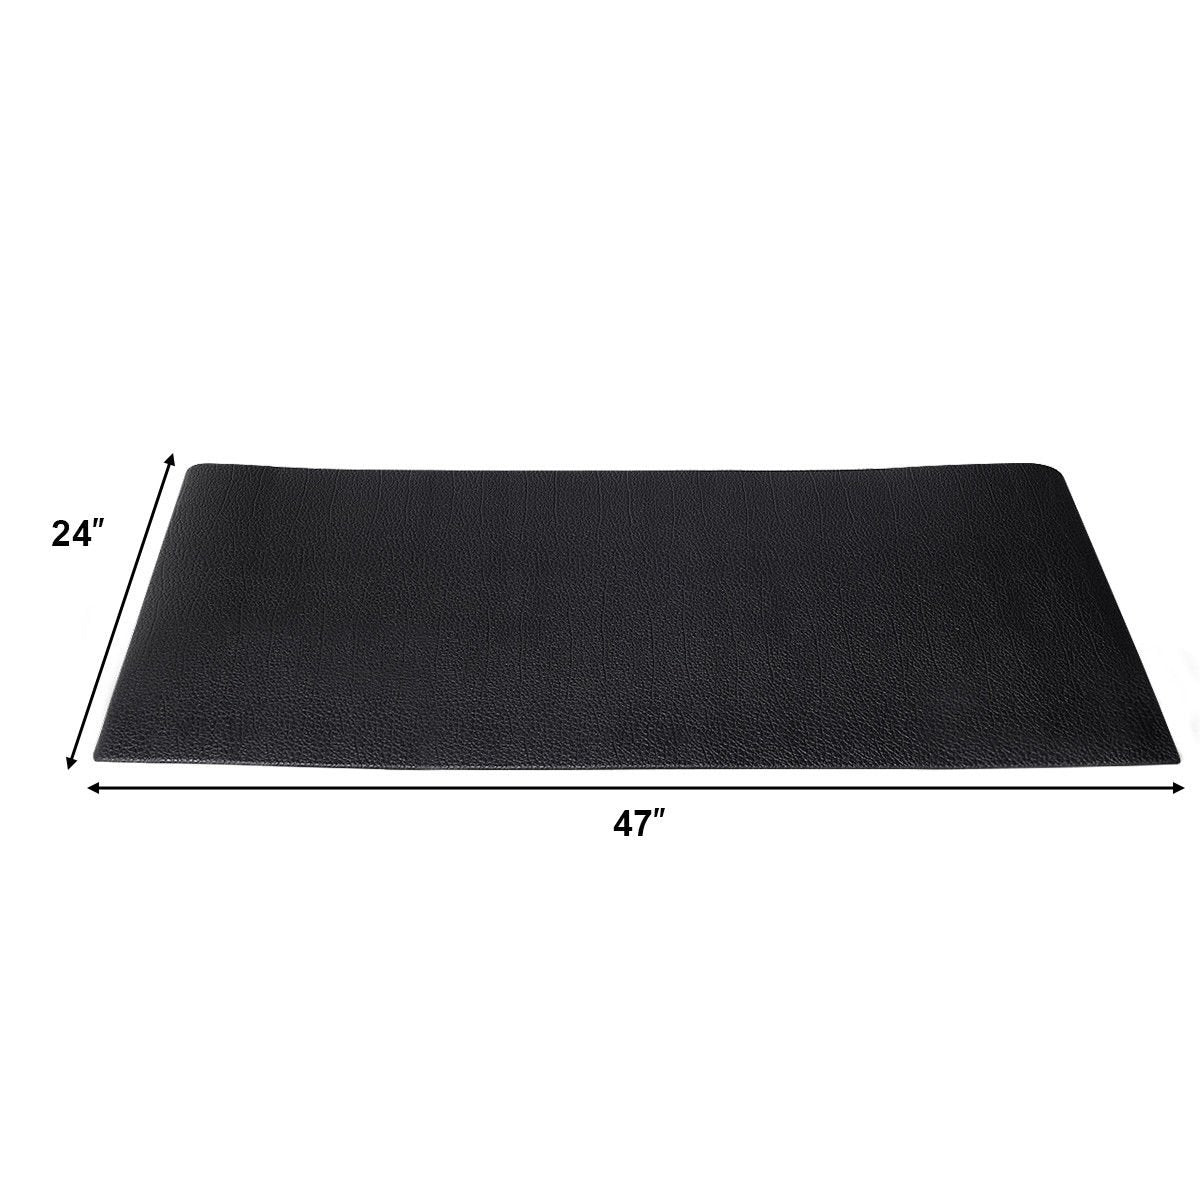 47/59/78 Inch Long Thicken Equipment Mat for Home and Gym Use-47 x 24 x 0.3 inches - Gallery Canada